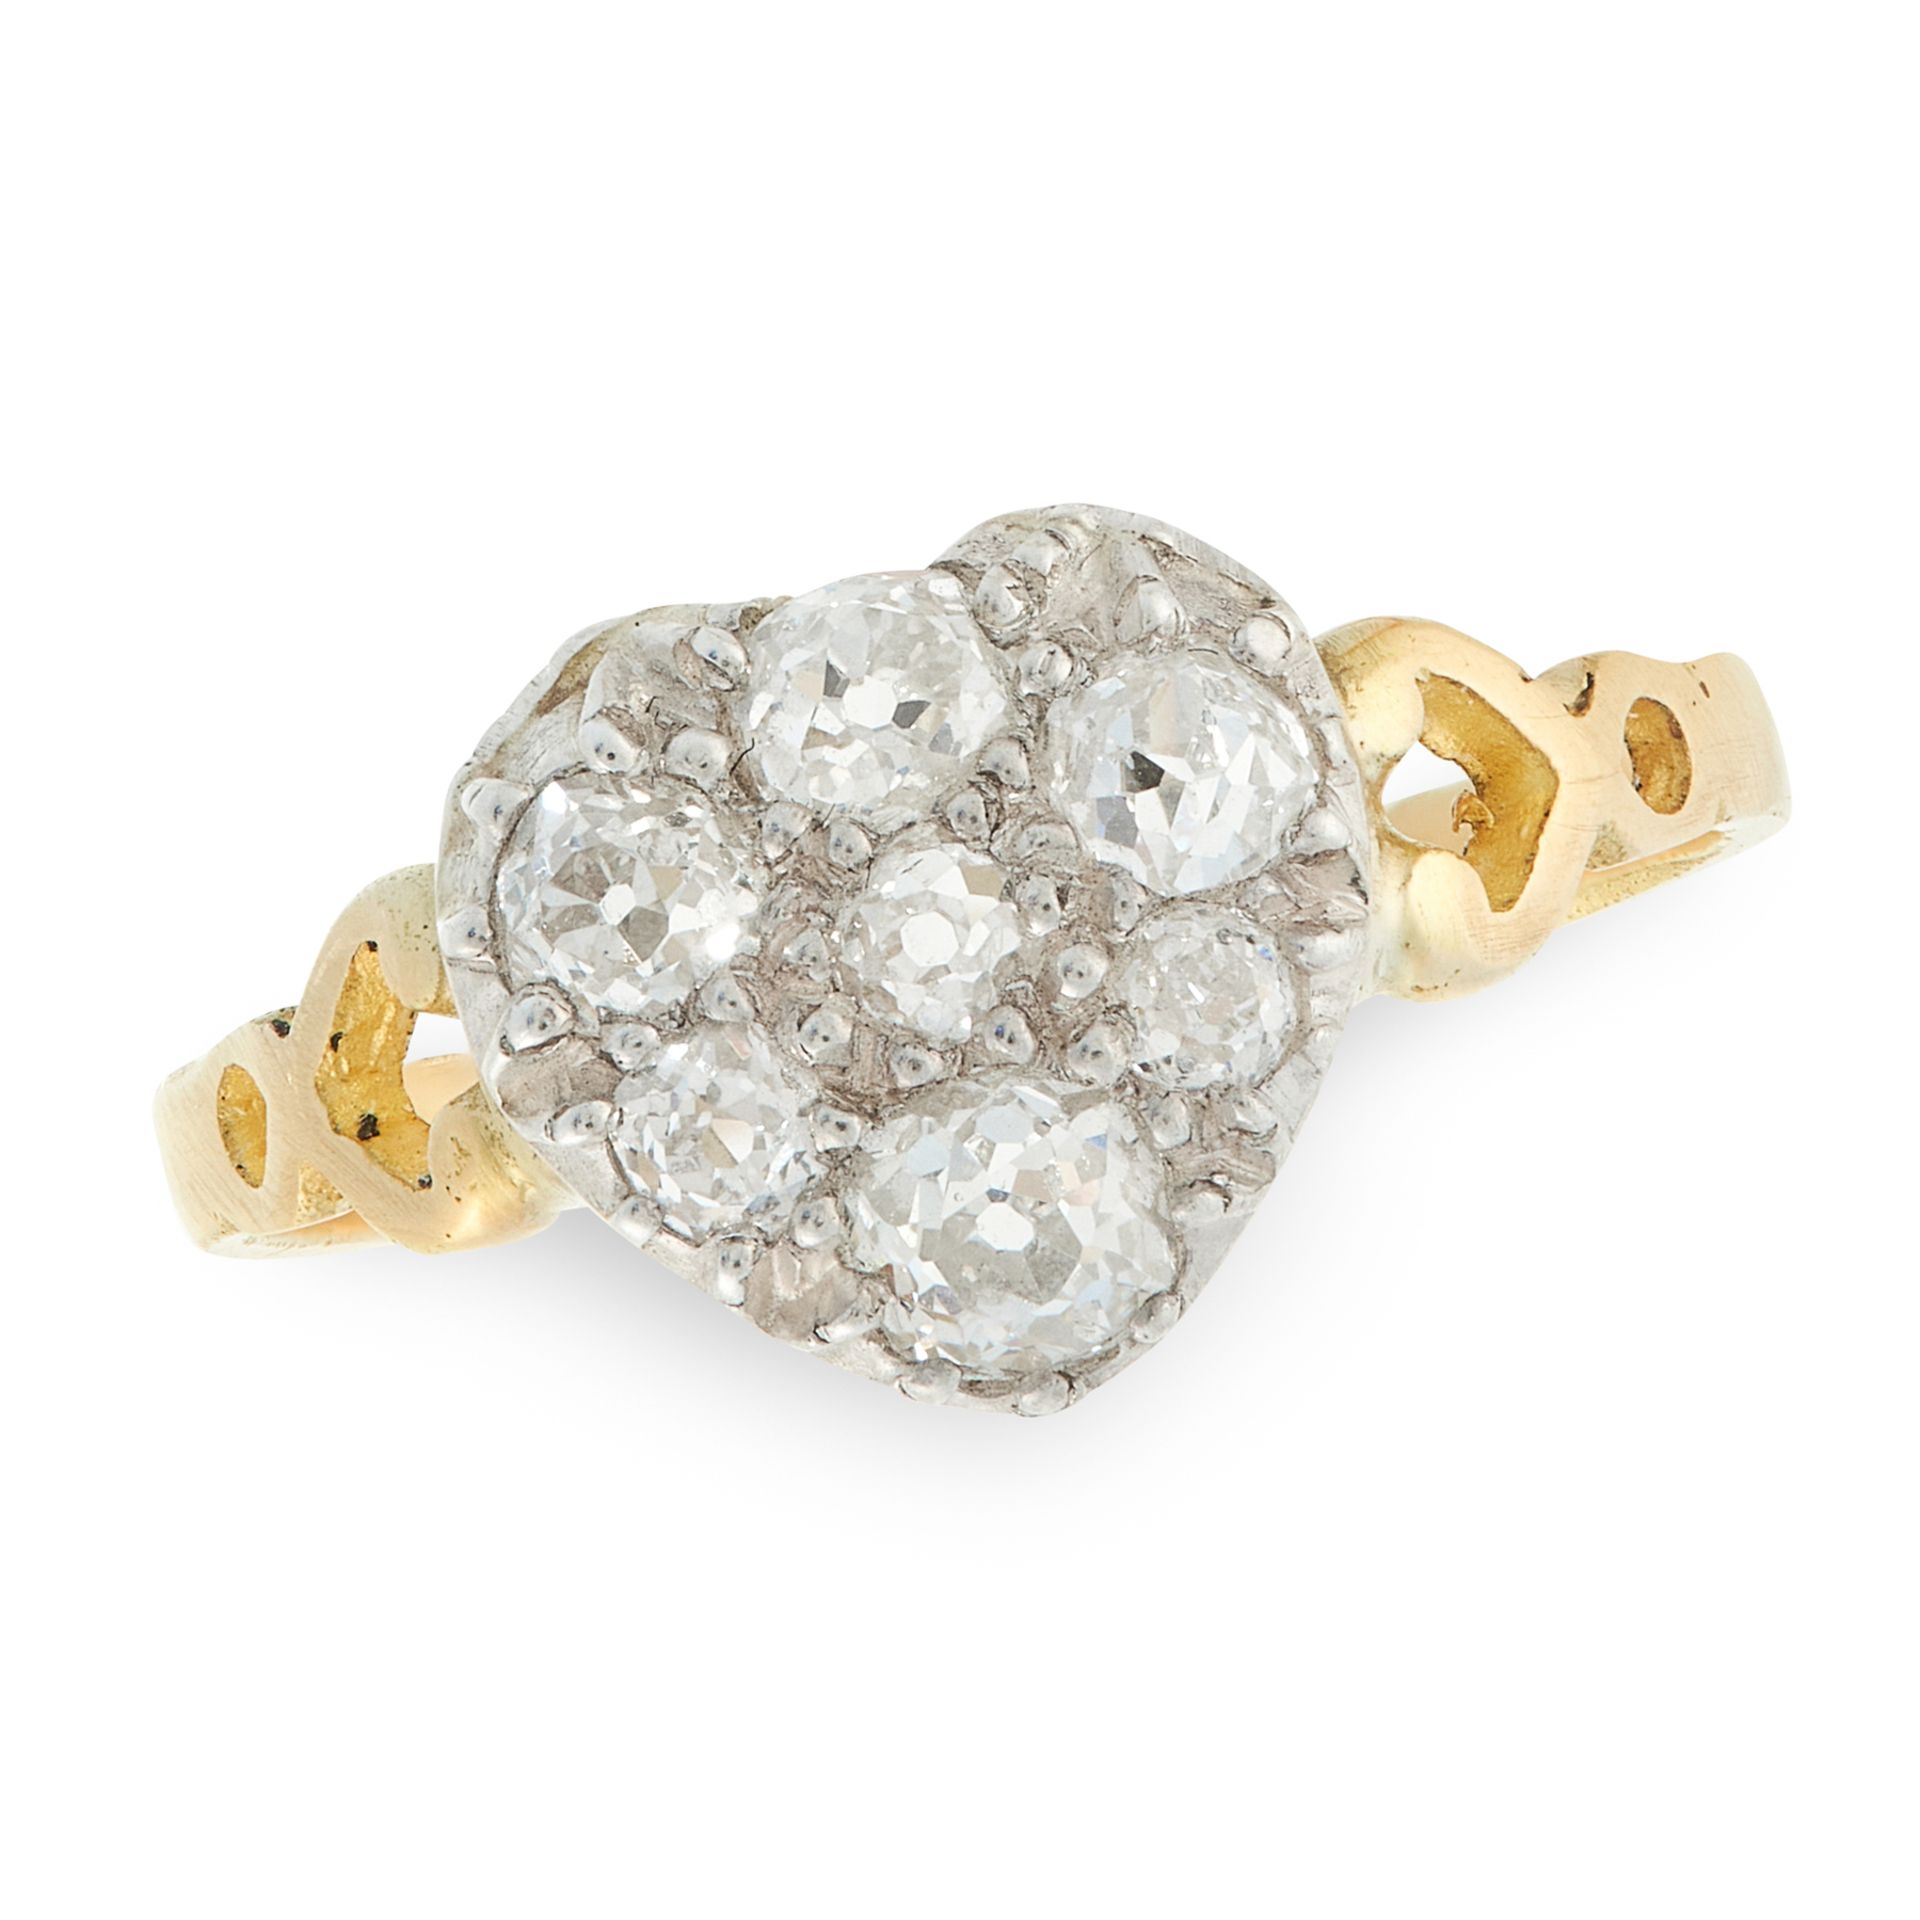 AN ANTIQUE DIAMOND DRESS RING in high carat yellow gold and silver, the face in the form of a heart,